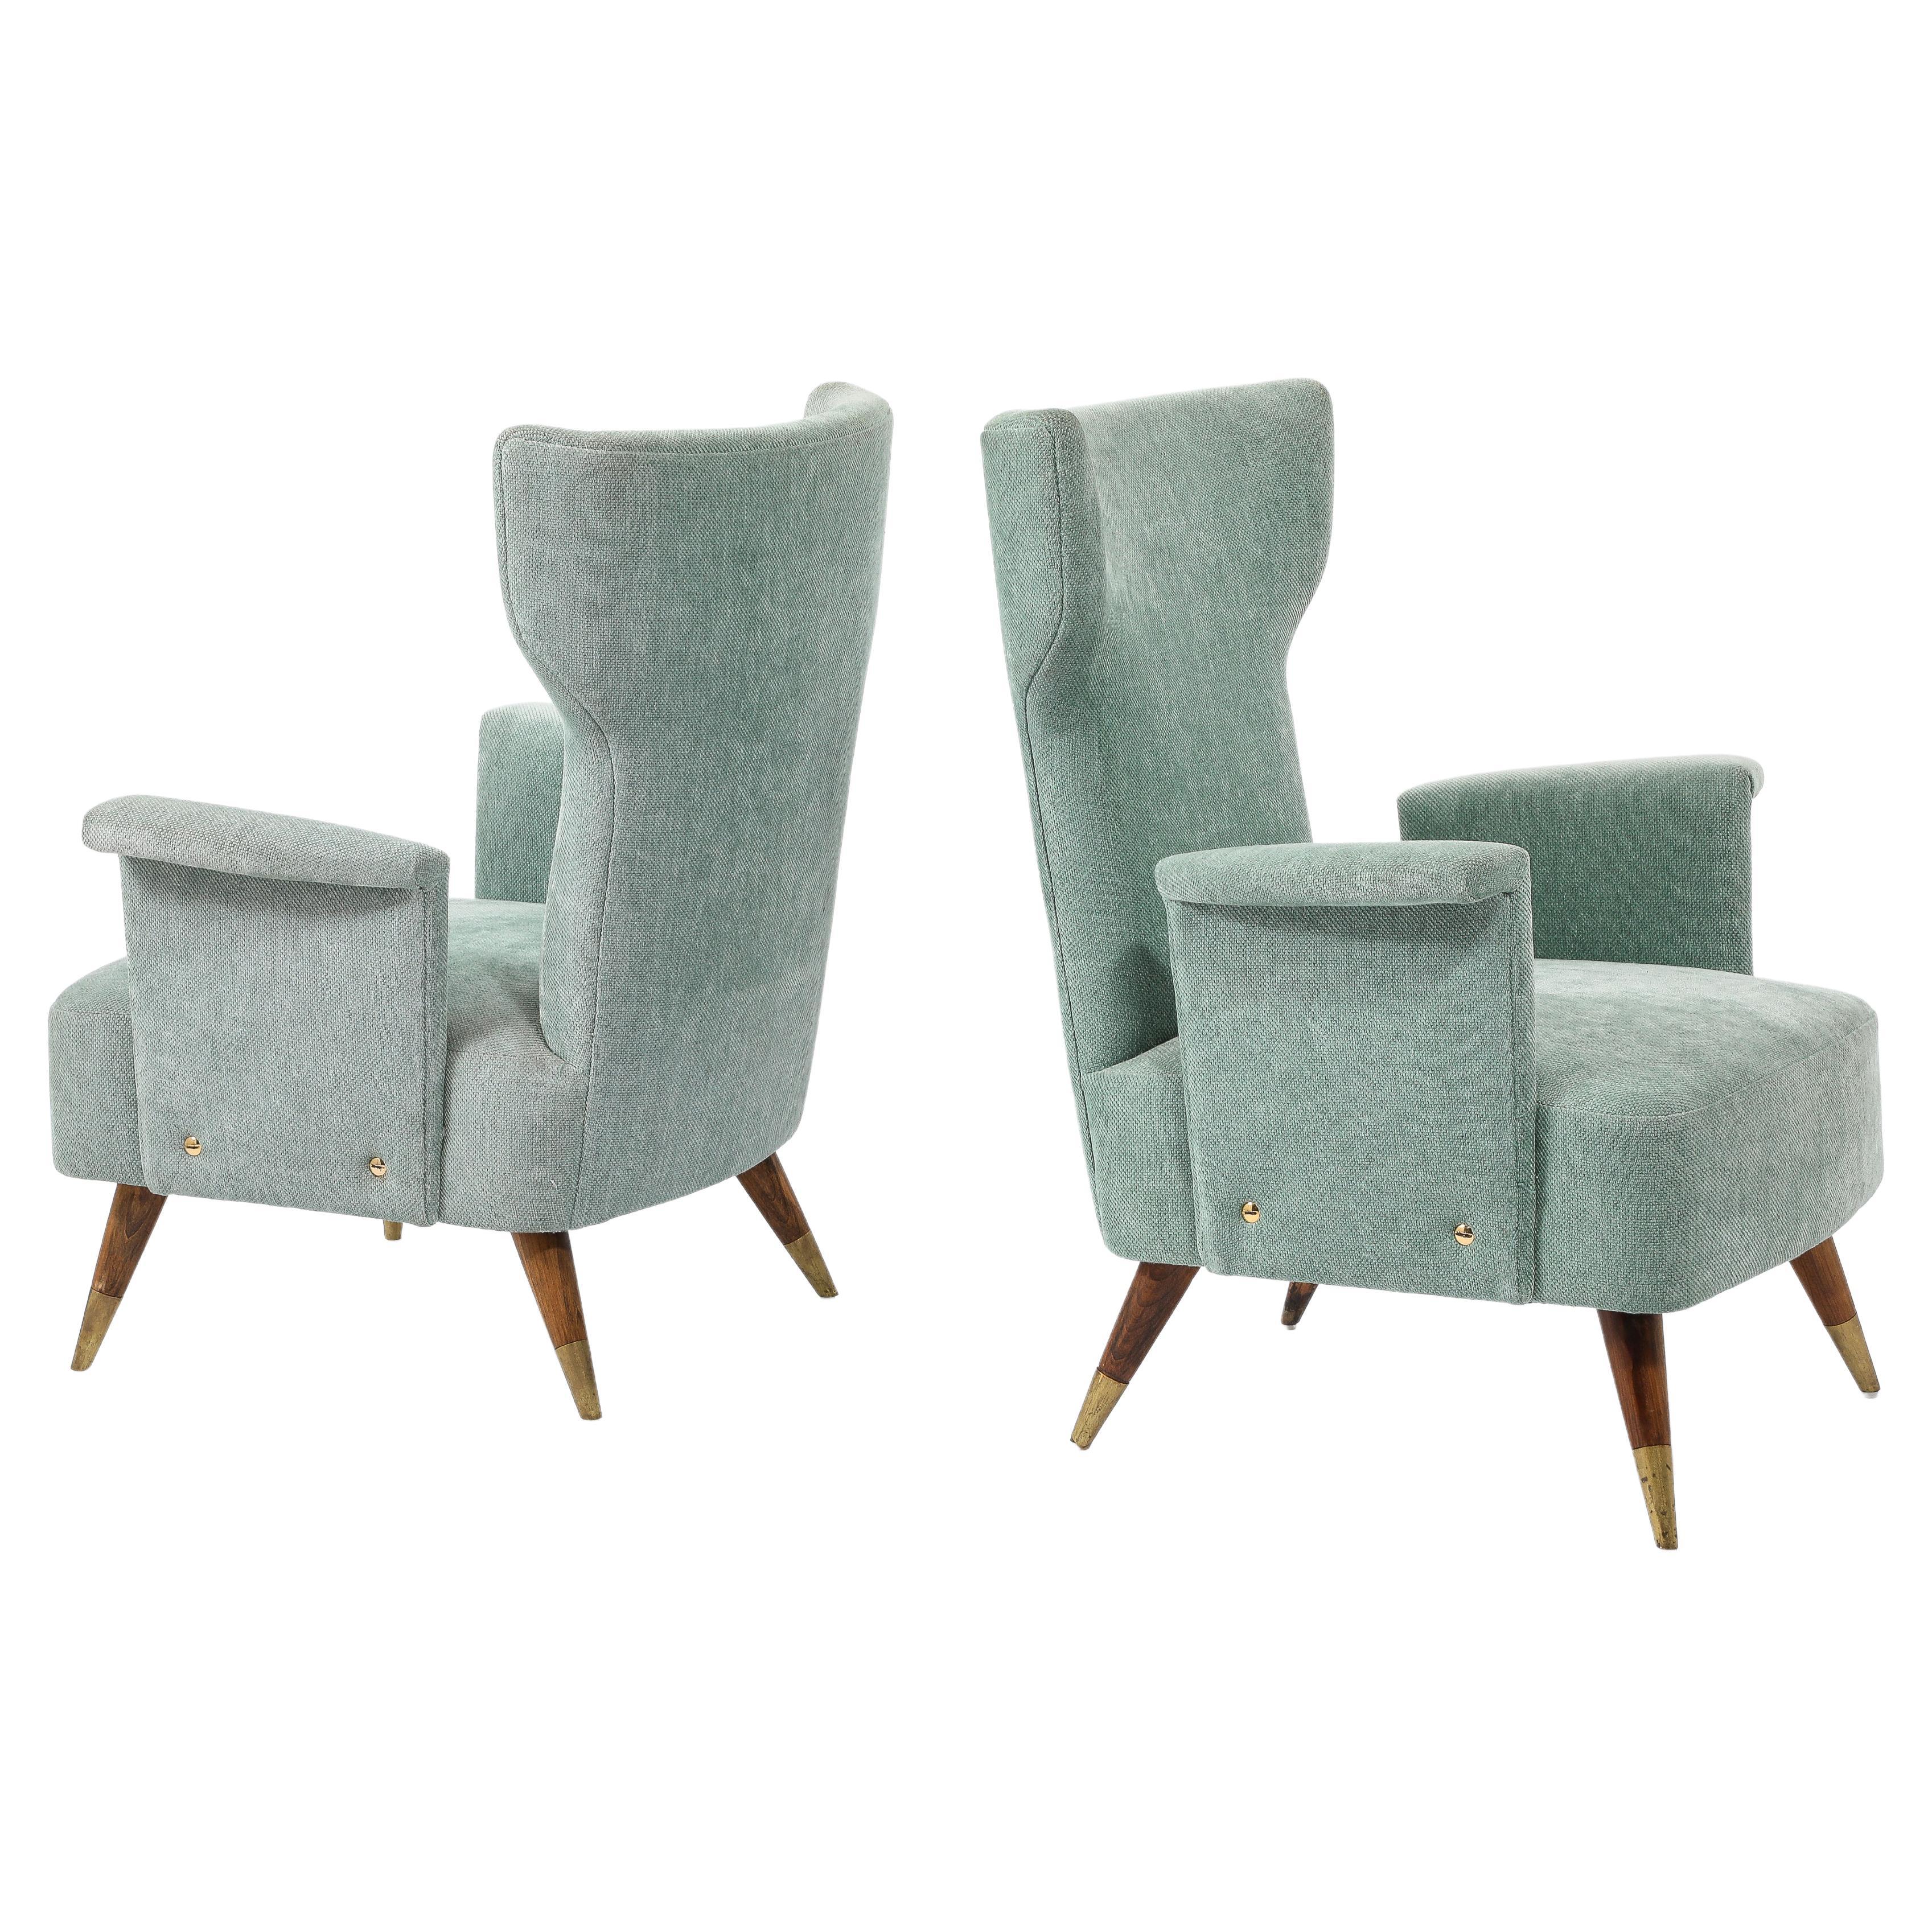 Pale Blue Tall Italian Wingchairs, Italy 1950's